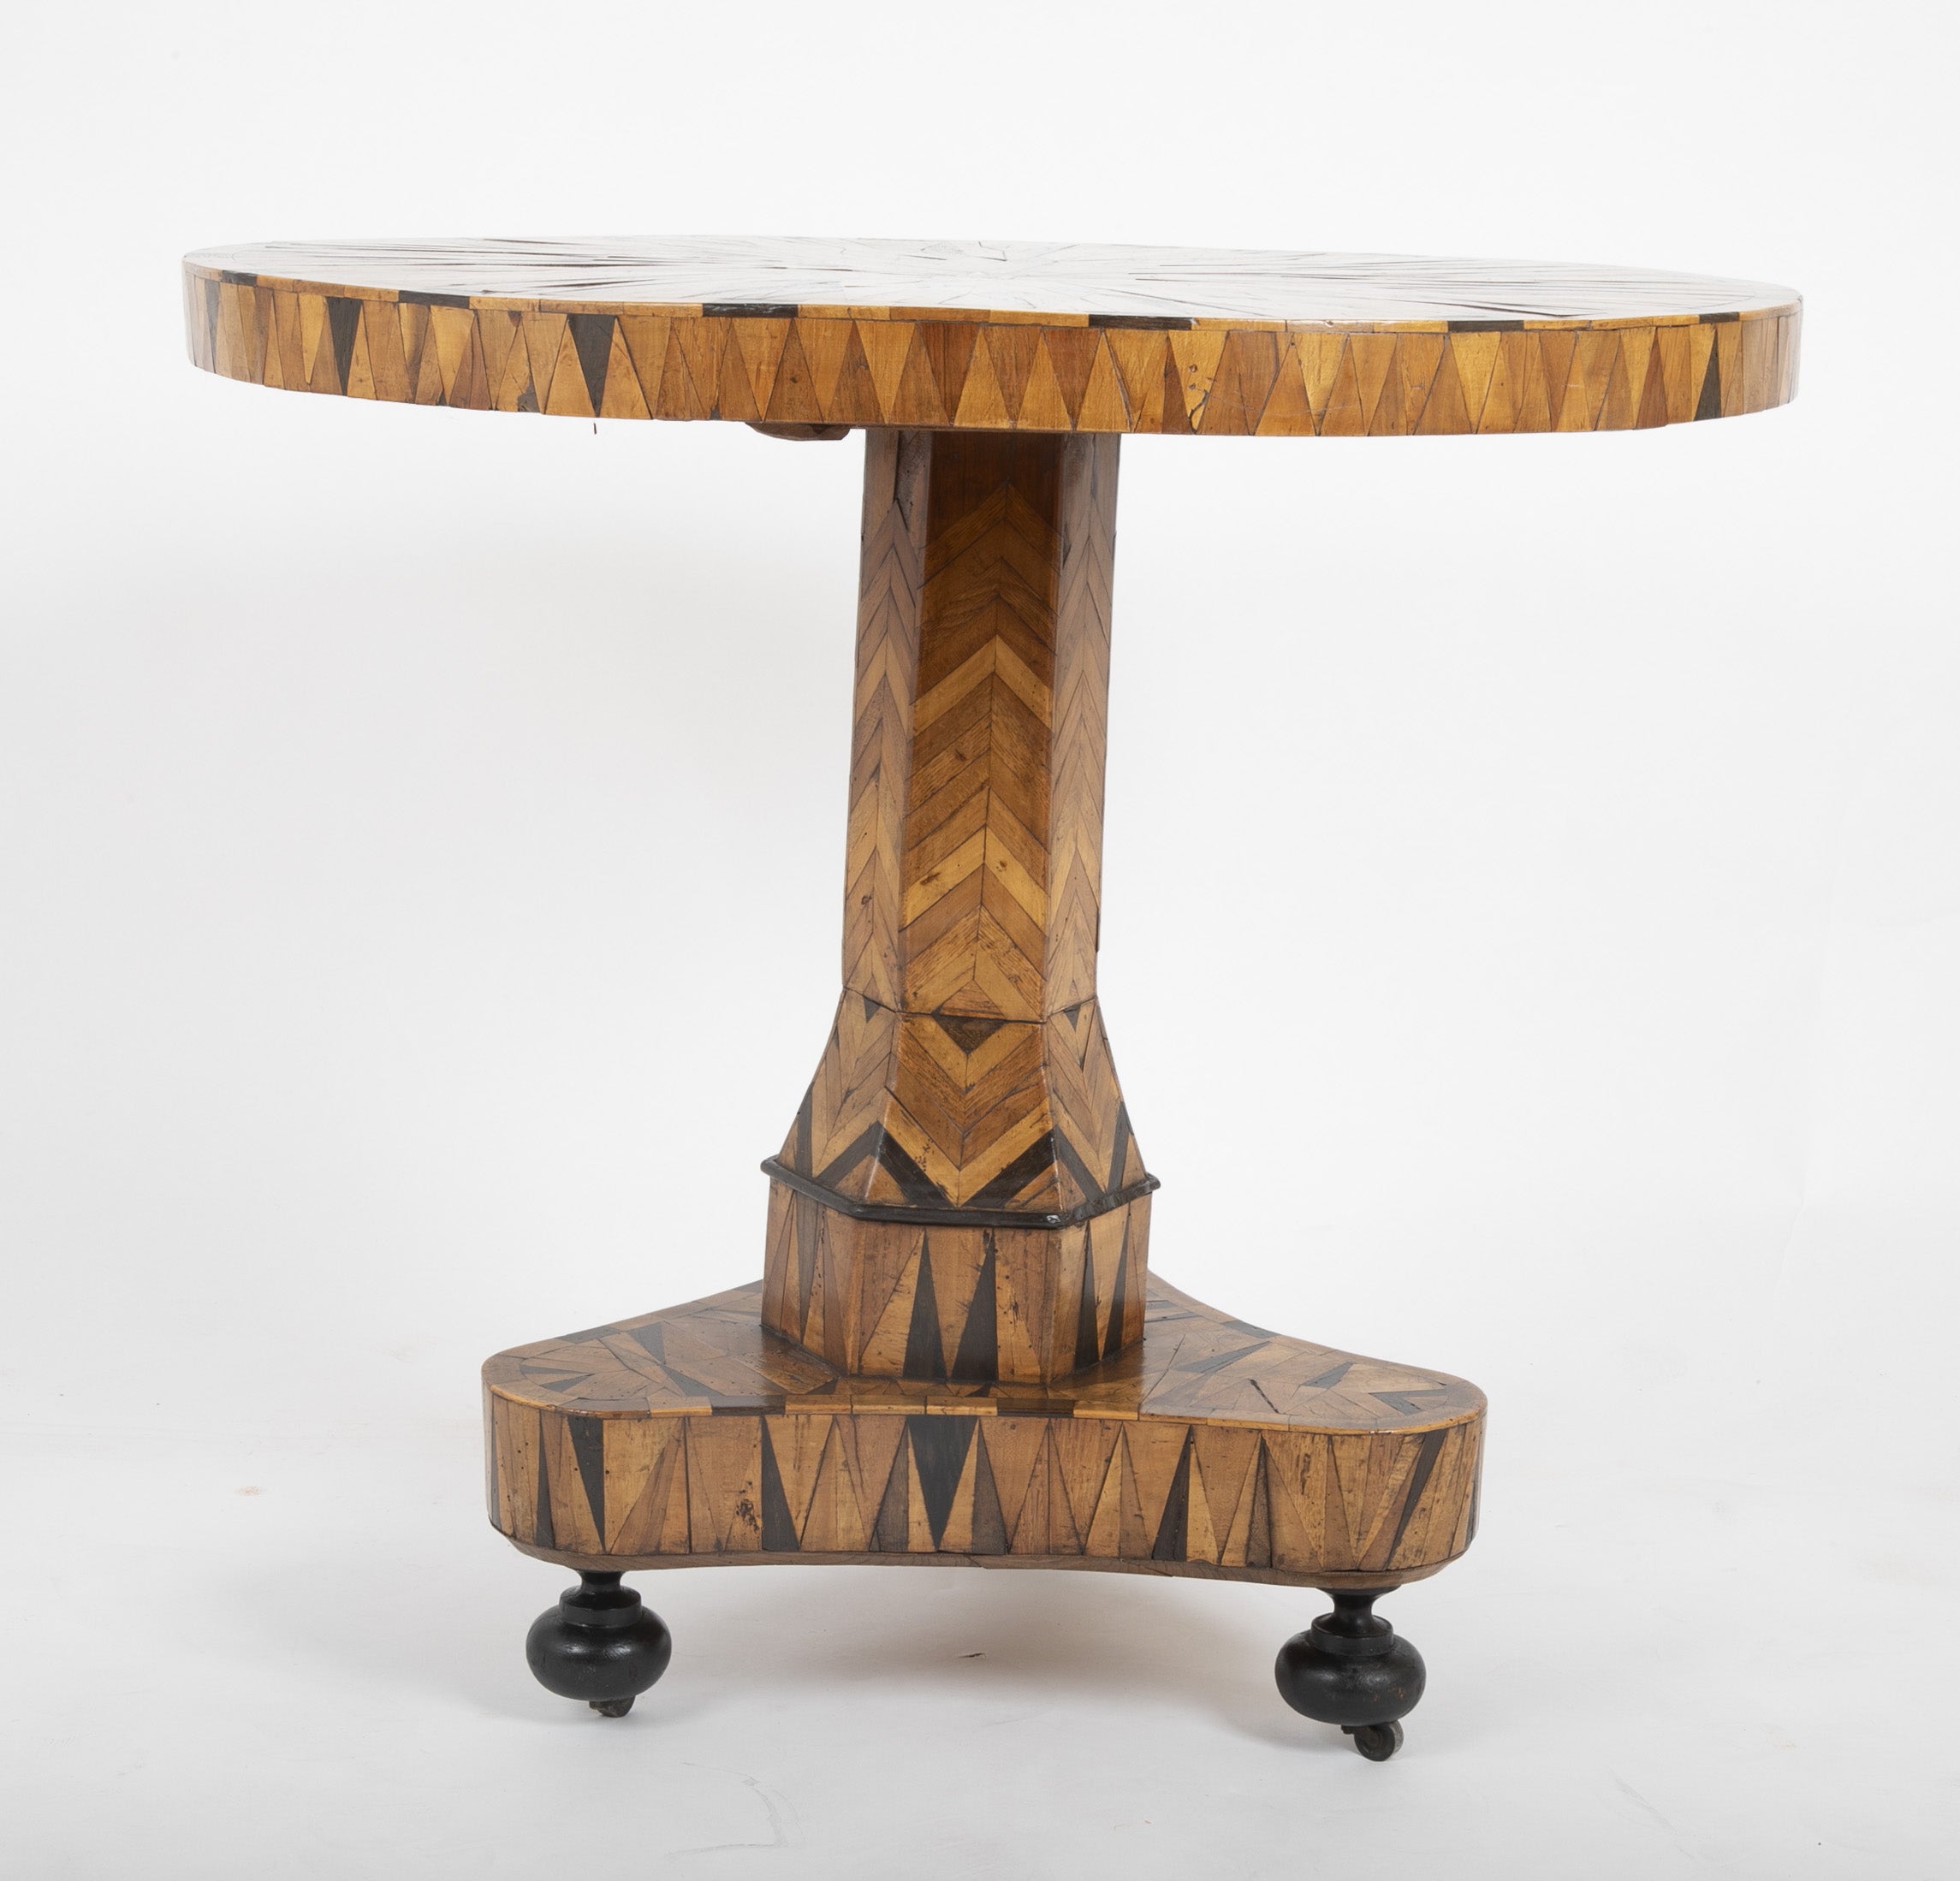 Early 19th Century Continental Parquetry Center Table